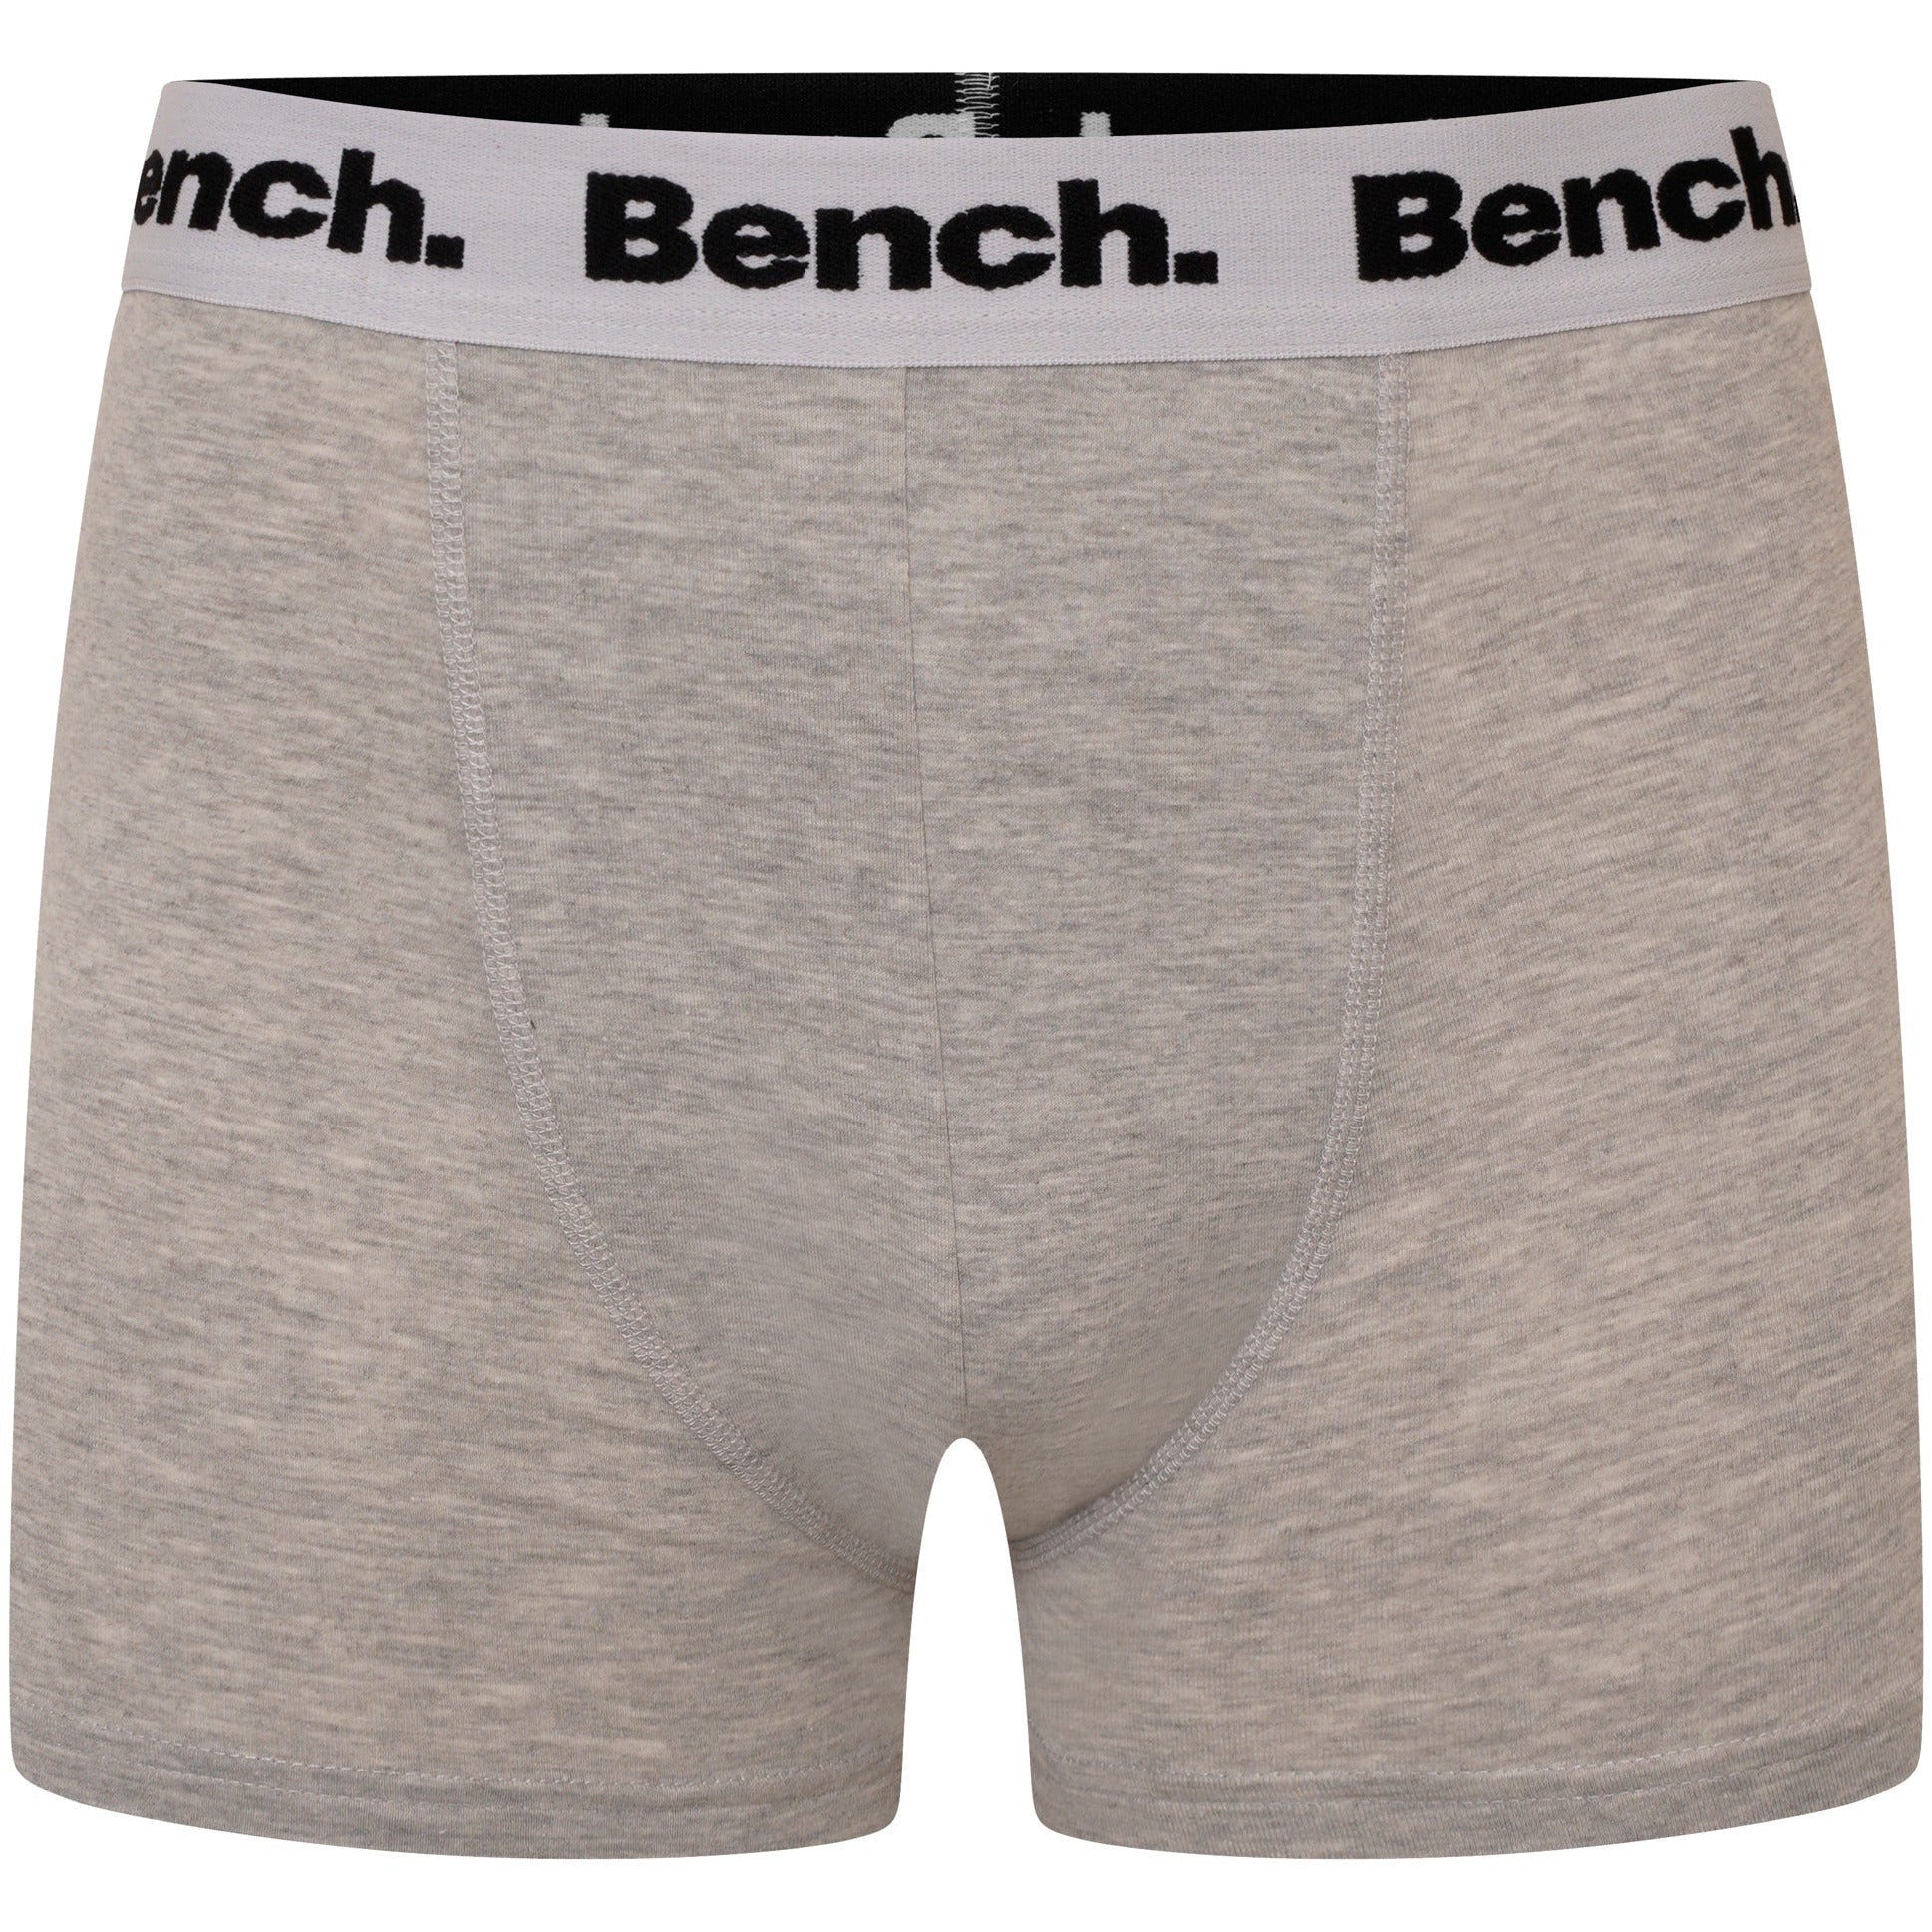 Shop - Mens 'MARCOS' 7 Pack Boxers - ASSORTED | Bench.co.uk | # ...